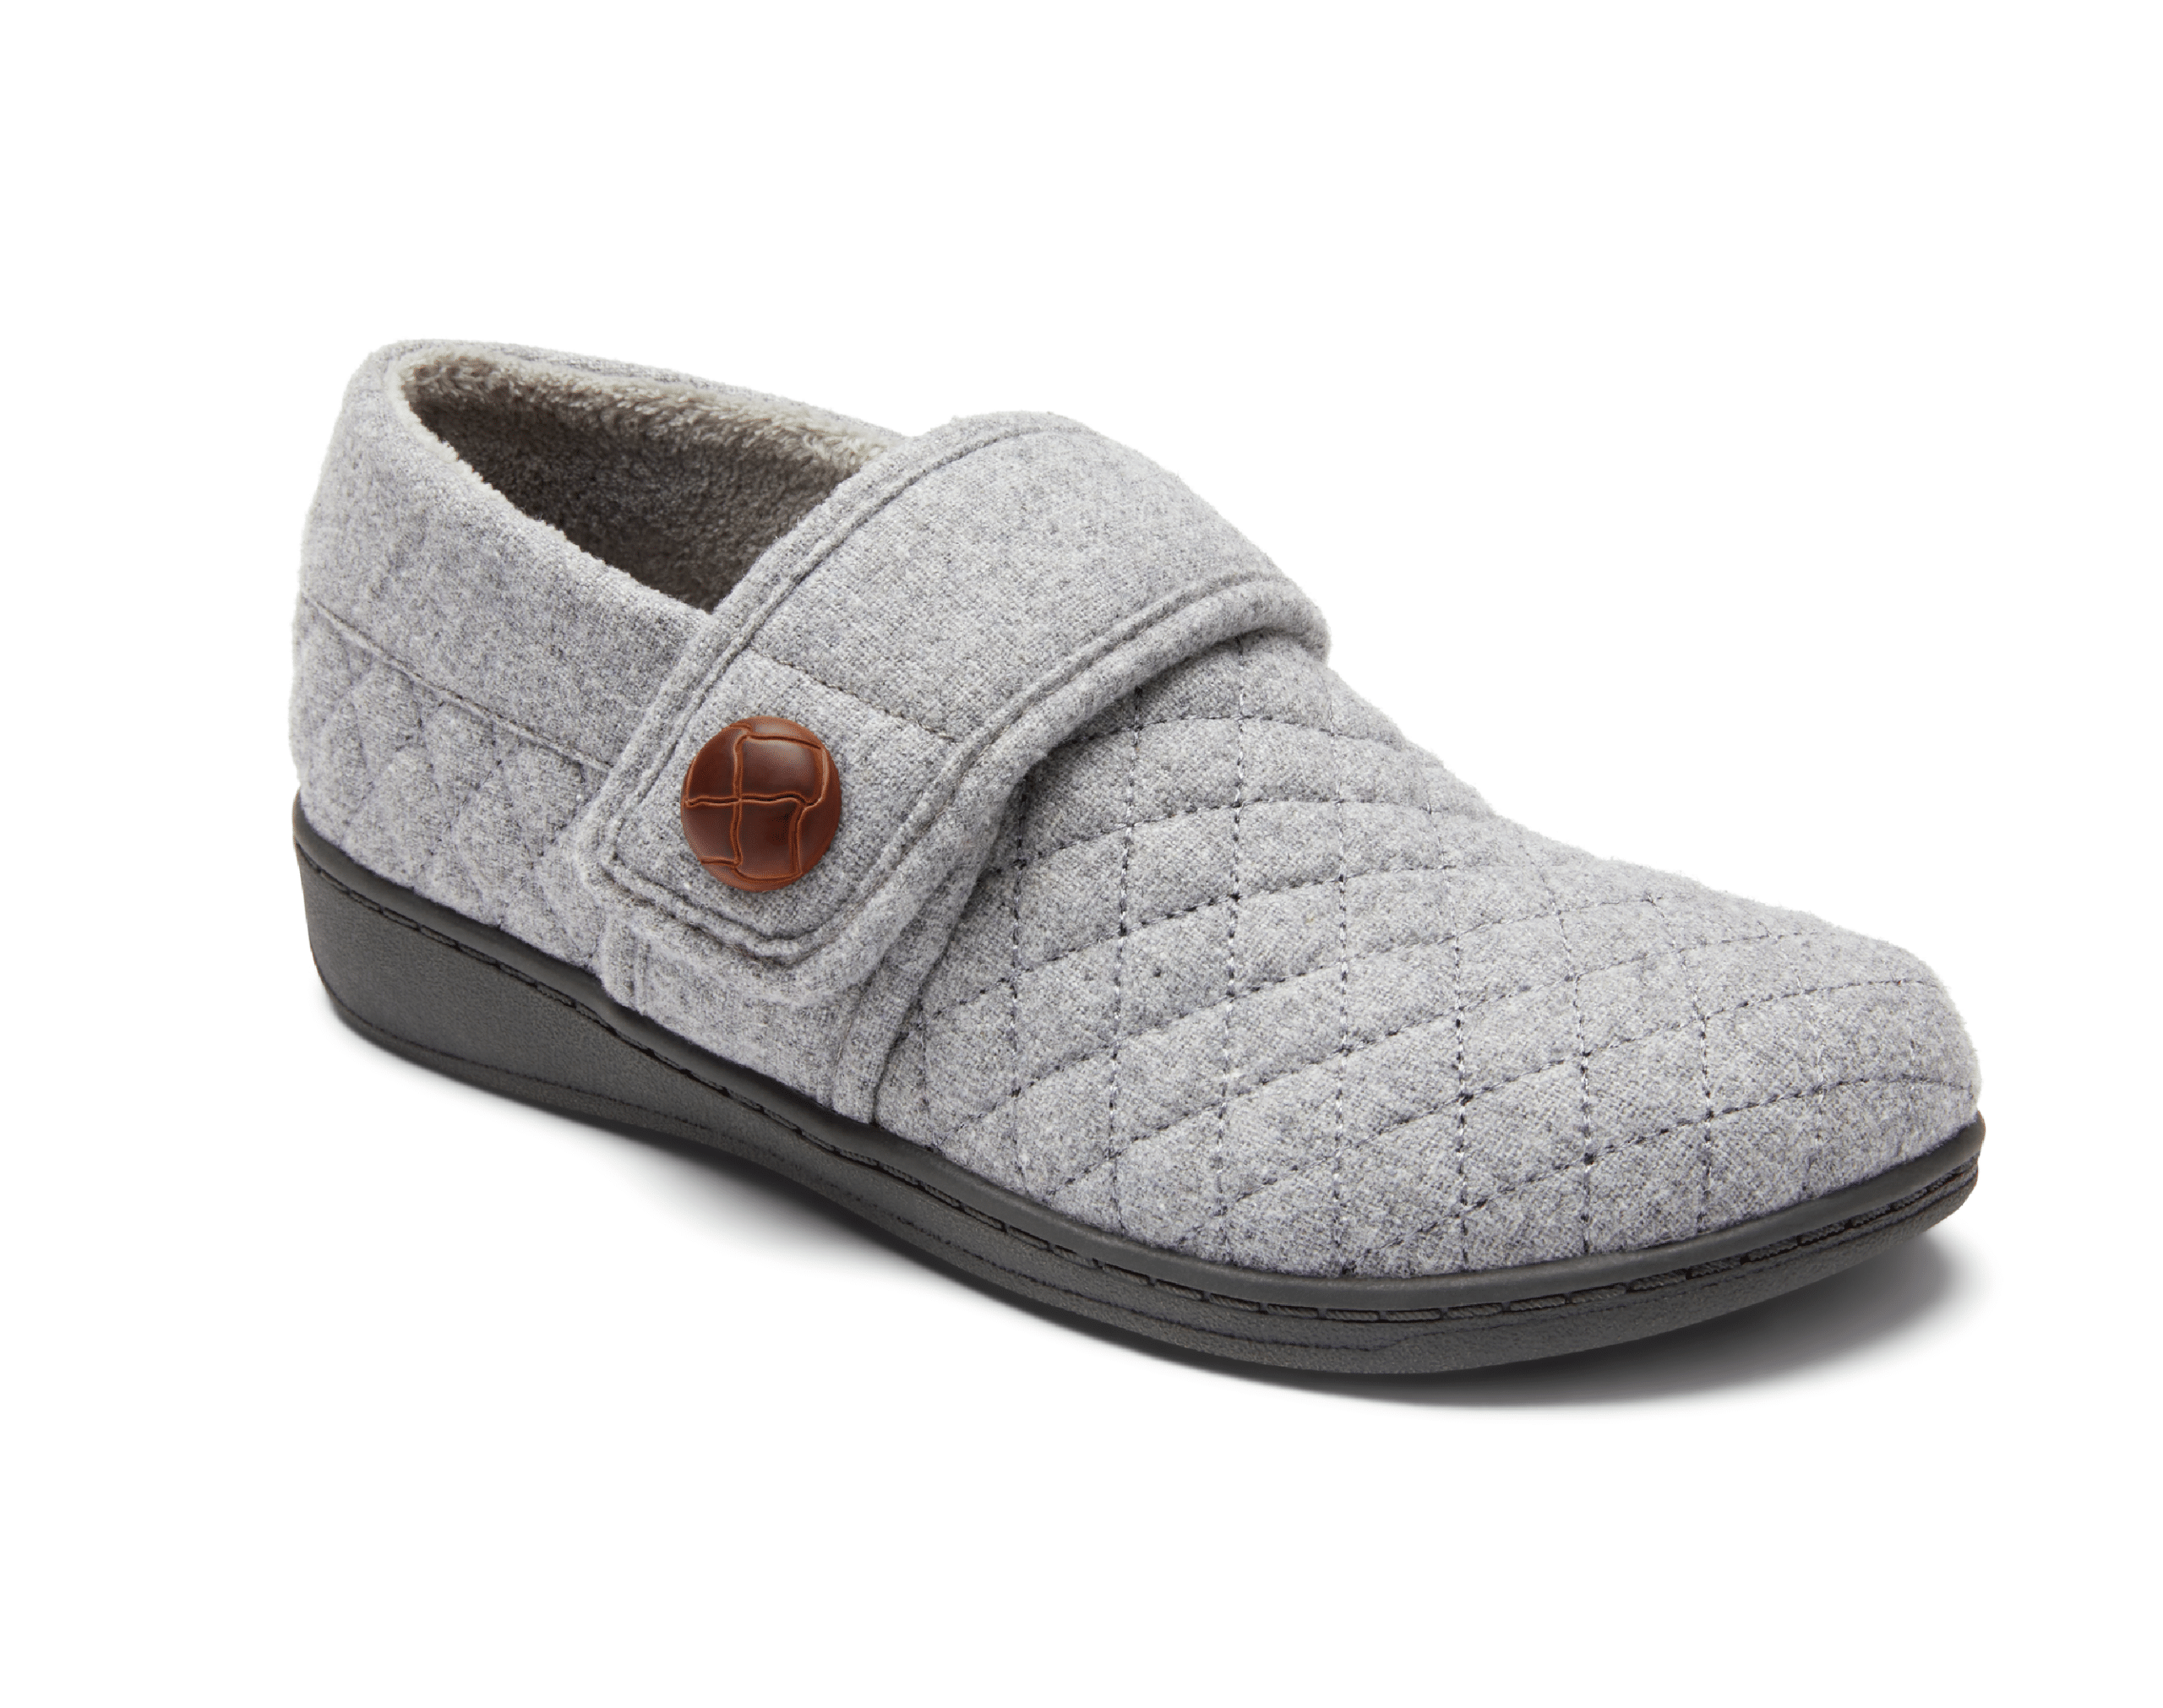 Slippers with Support | The Bone Store | Vionic - Powerstep - Spenco